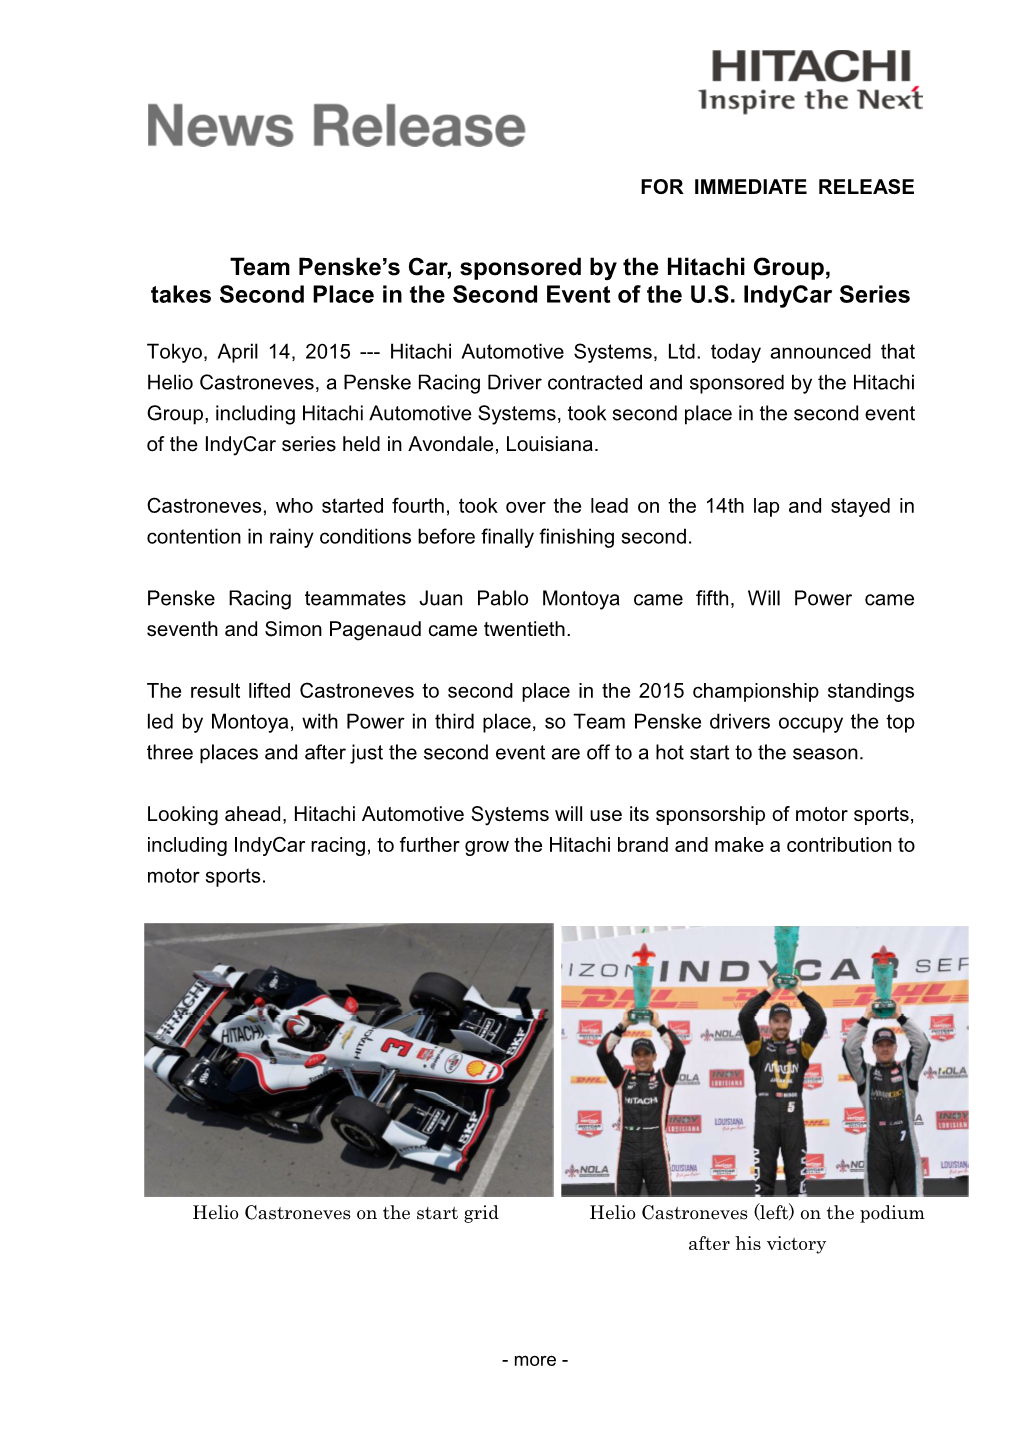 Team Penske's Car, Sponsored by the Hitachi Group, Takes Second Place